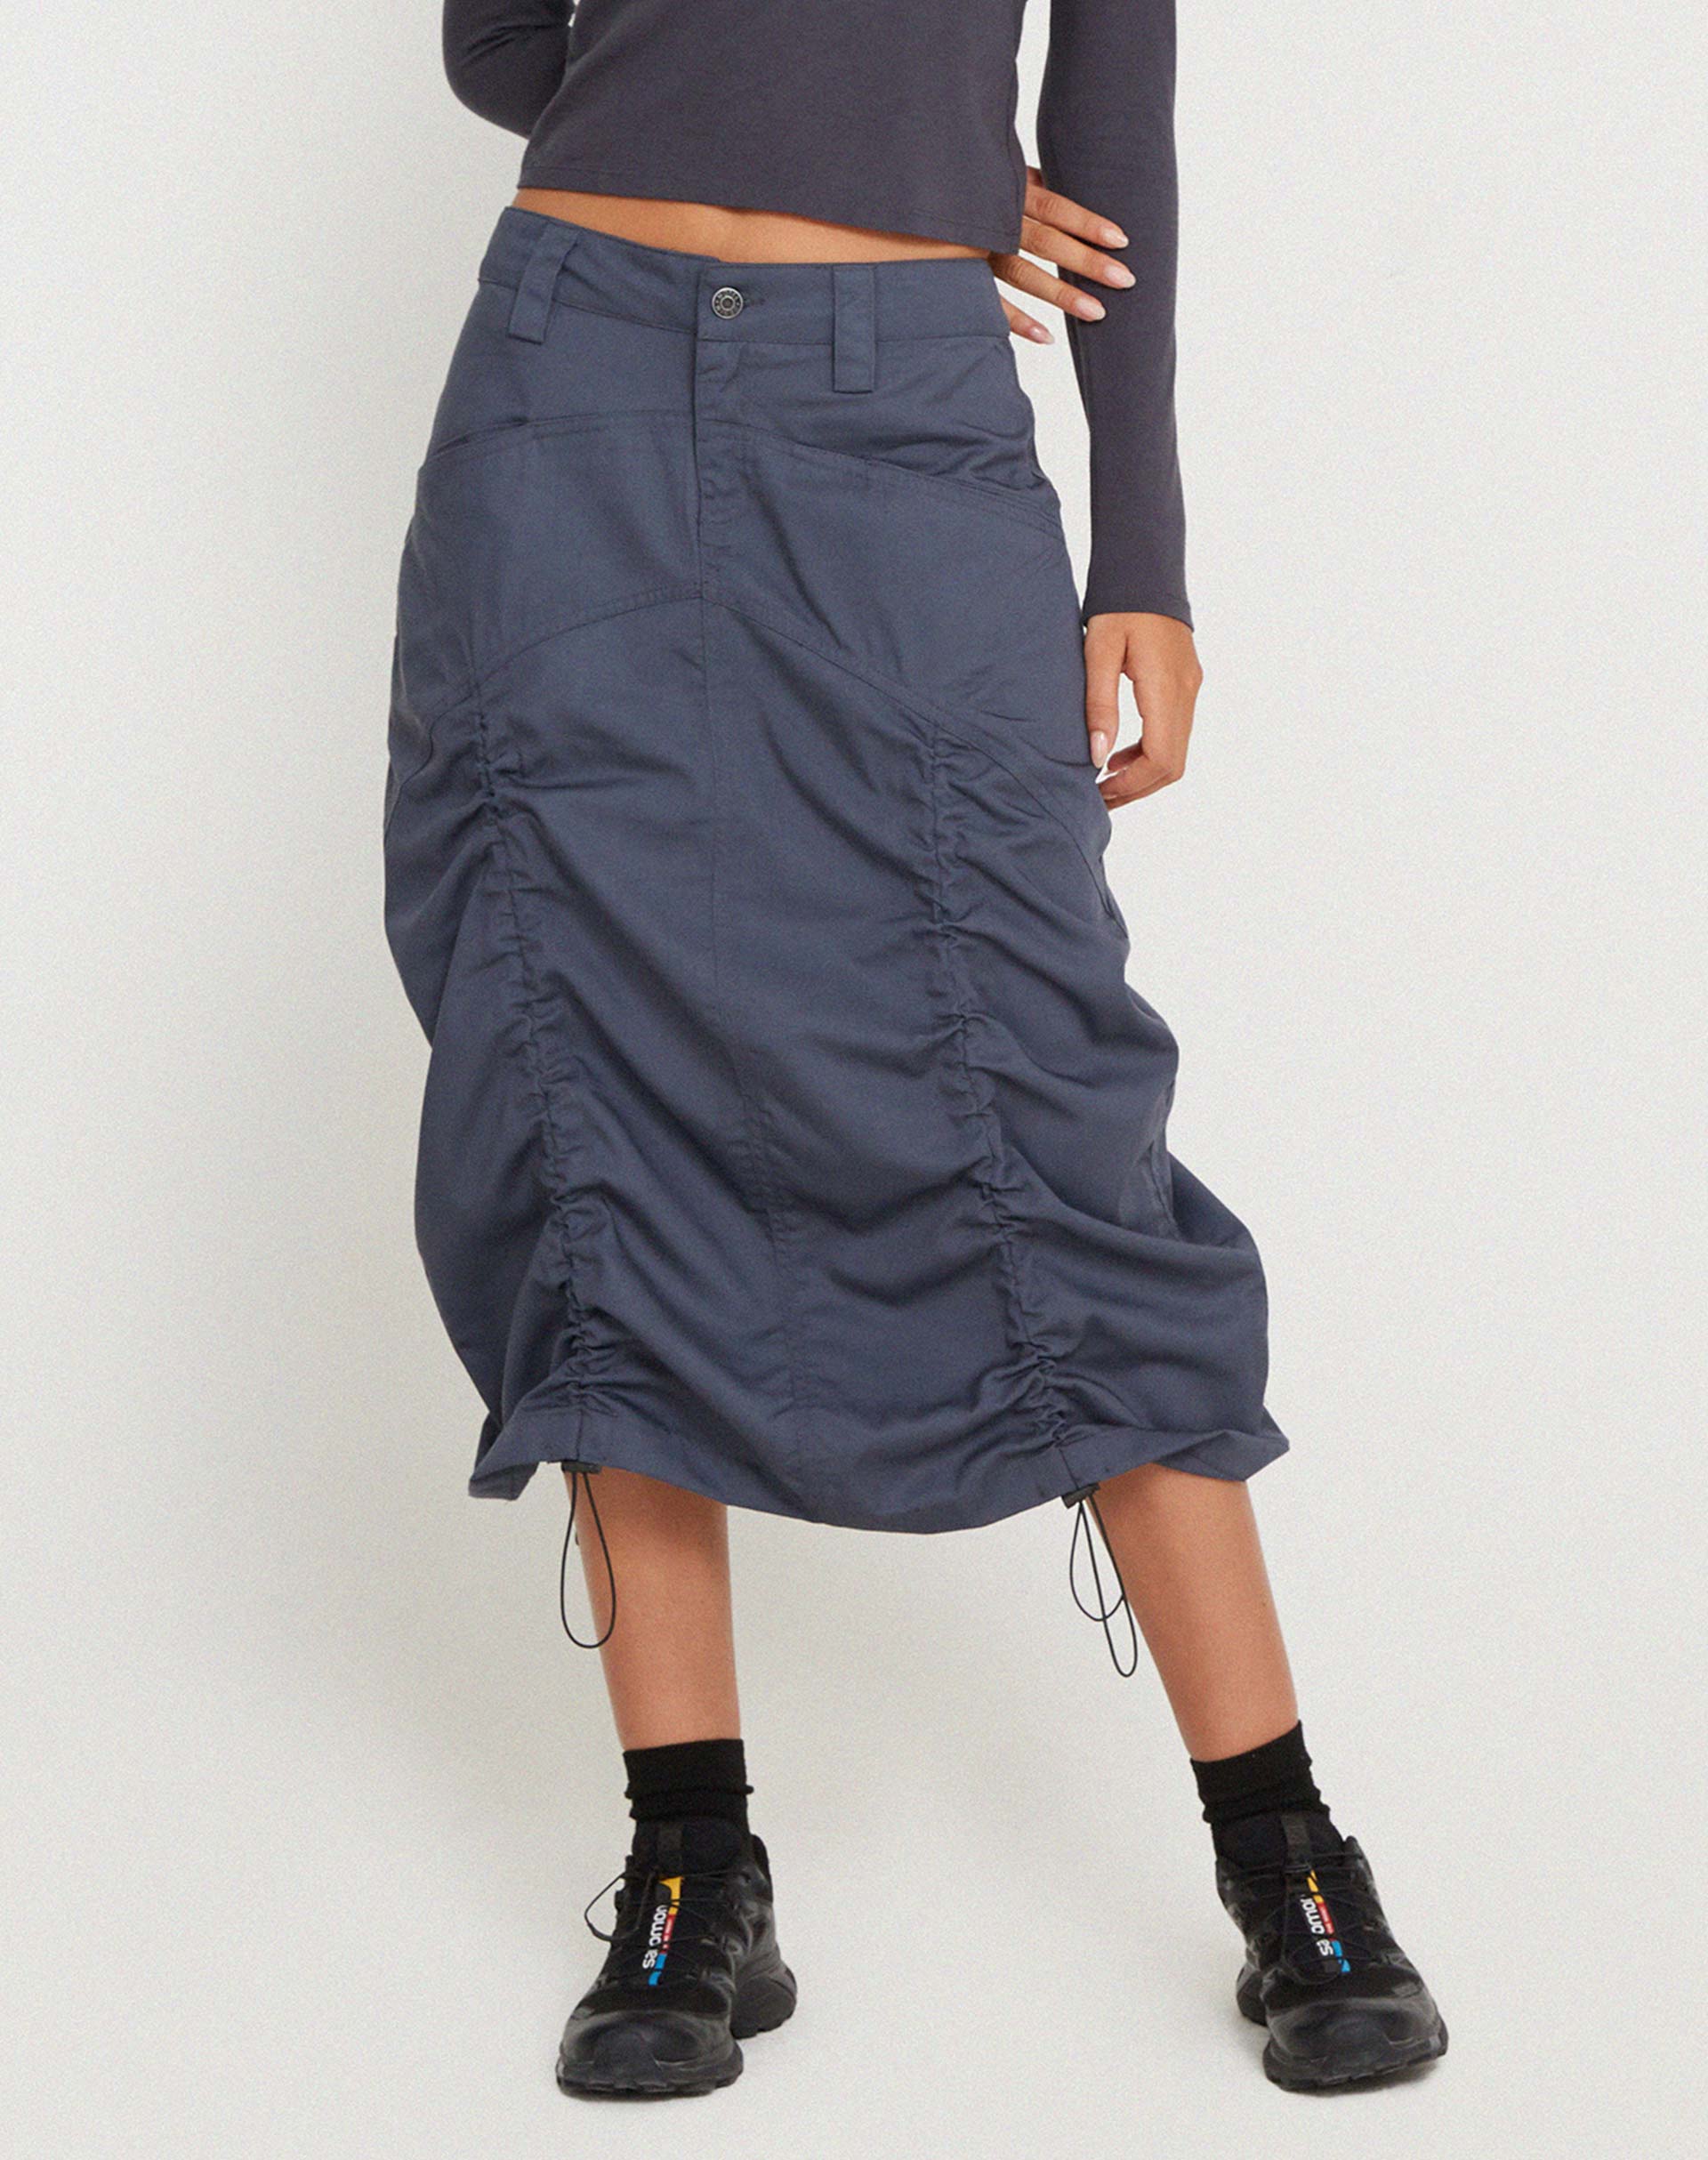 Image of Eisig Cargo Midi Skirt in Charcoal Navy